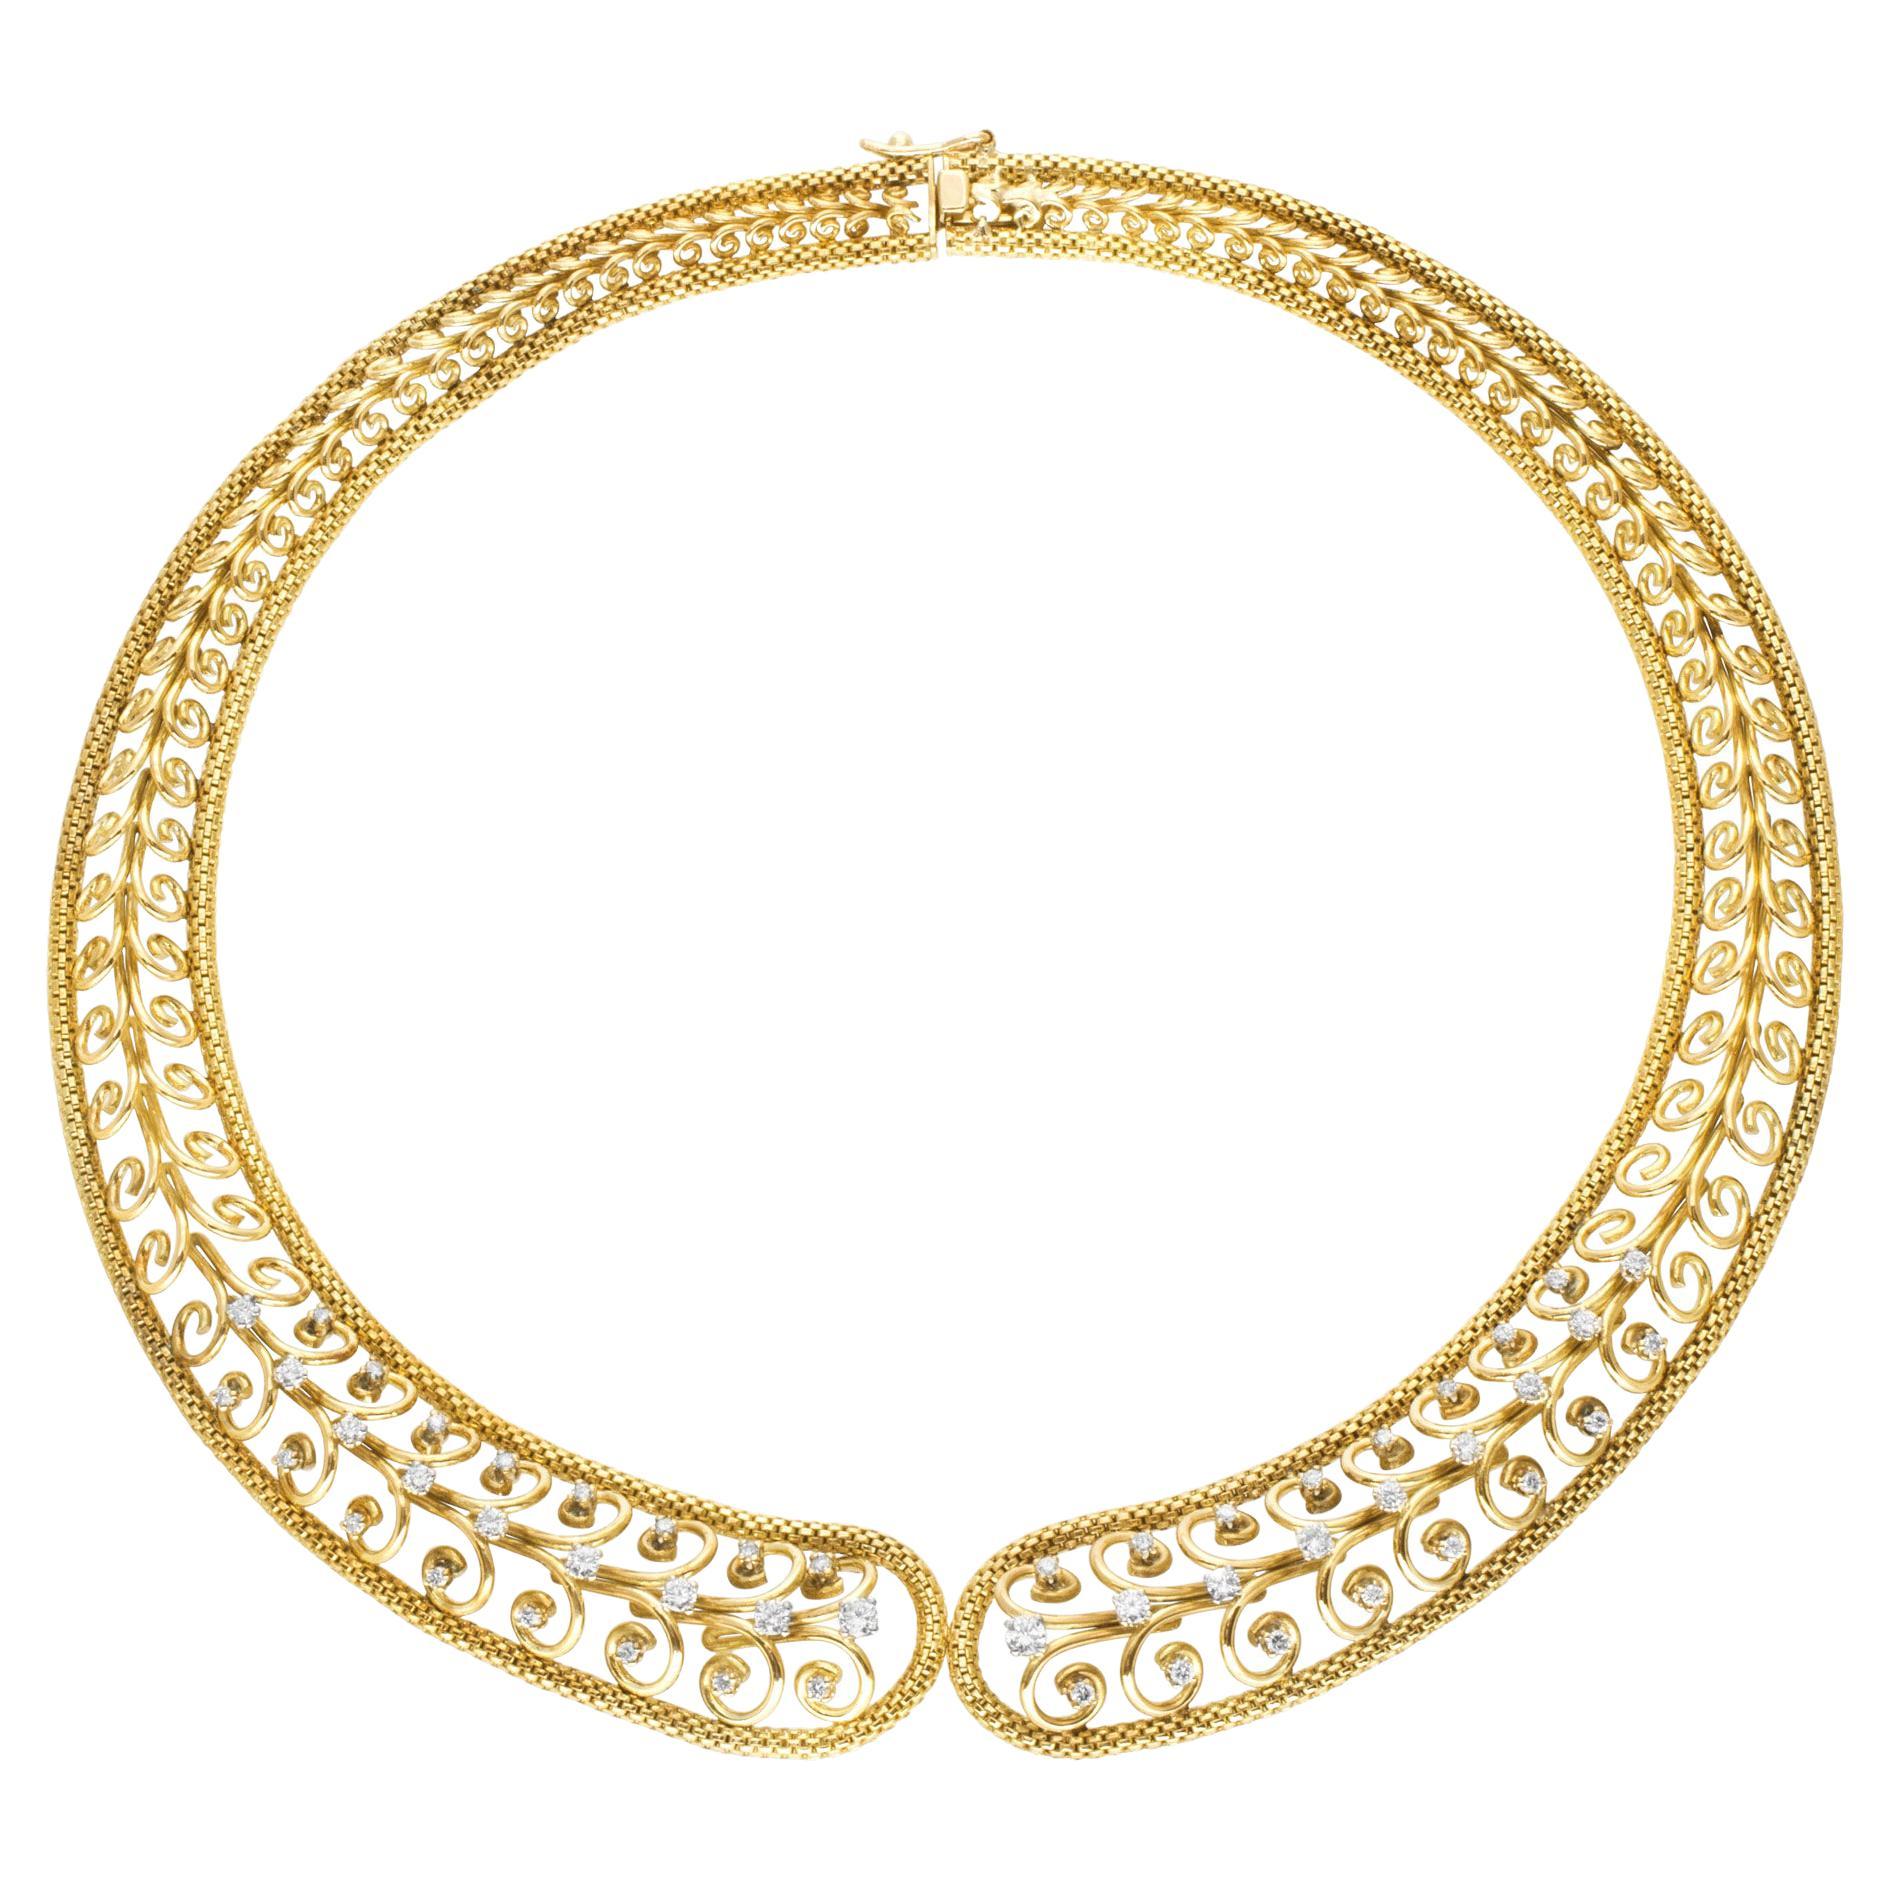 Necklace with Diamond Accents in 18k Yellow Gold Swirl Link Choker